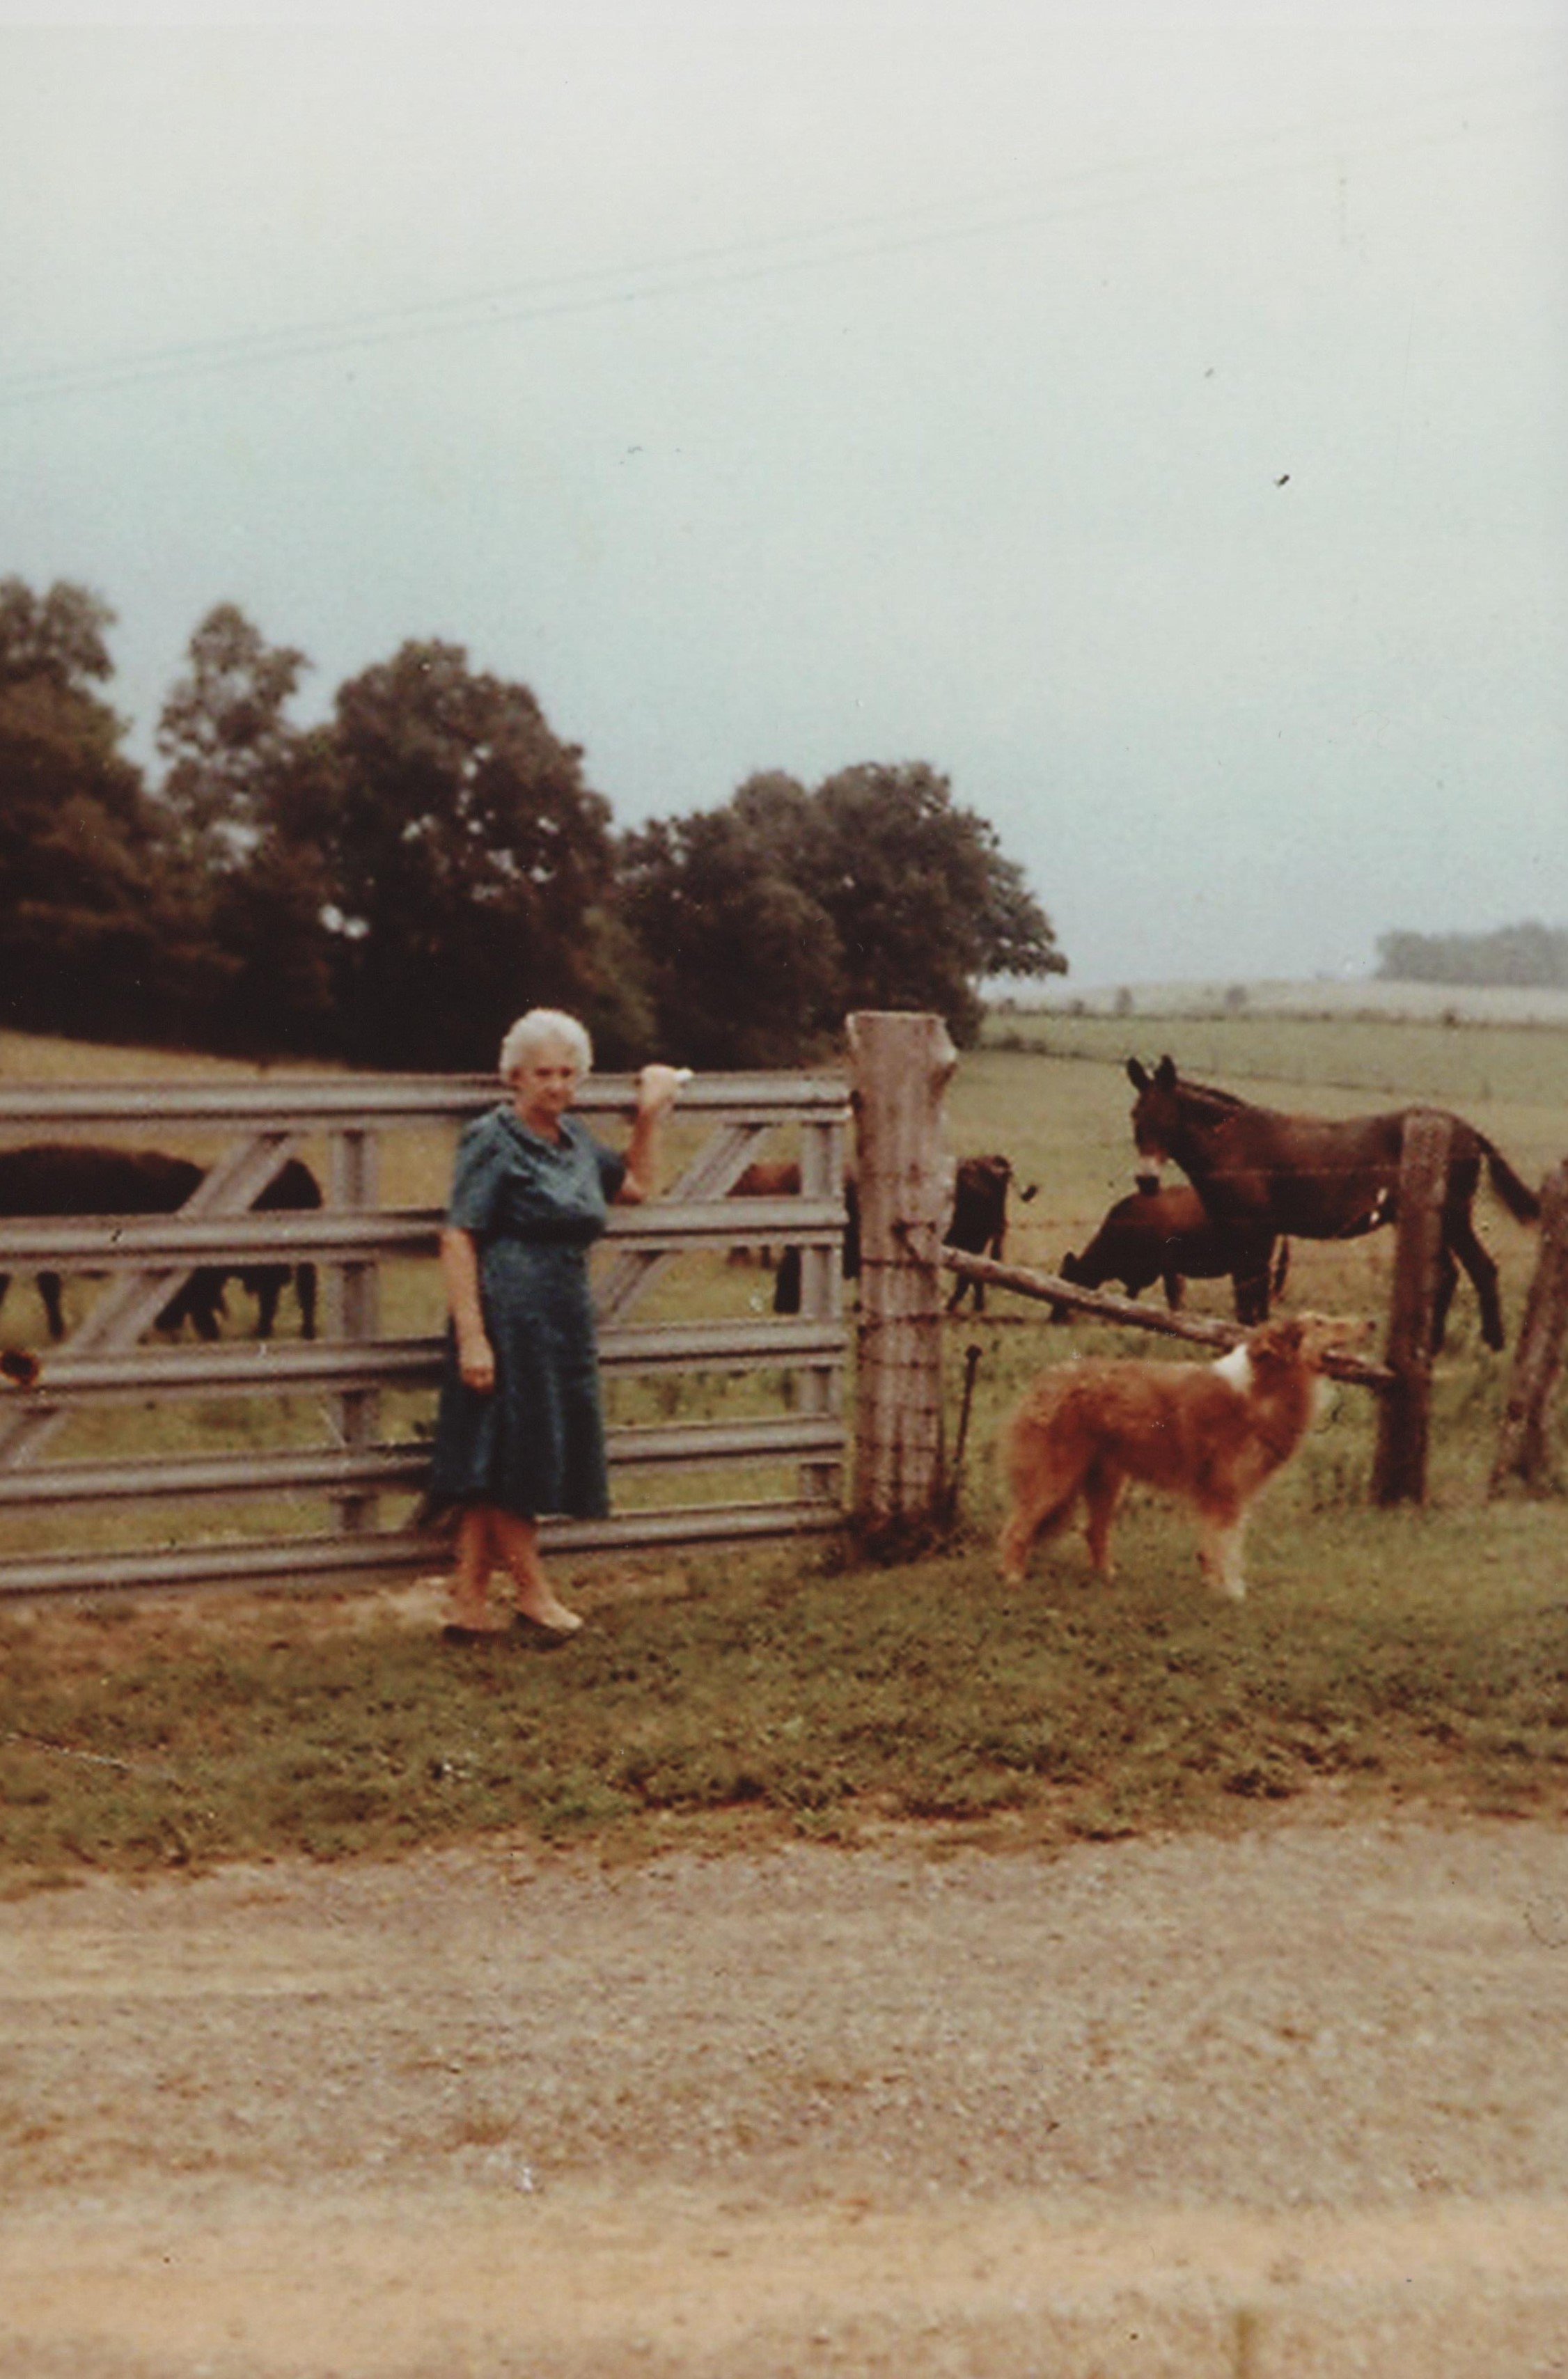 Color photograph of woman with white hair standing near cattle gates with a brown dog nearby, horses in field behind the woman.